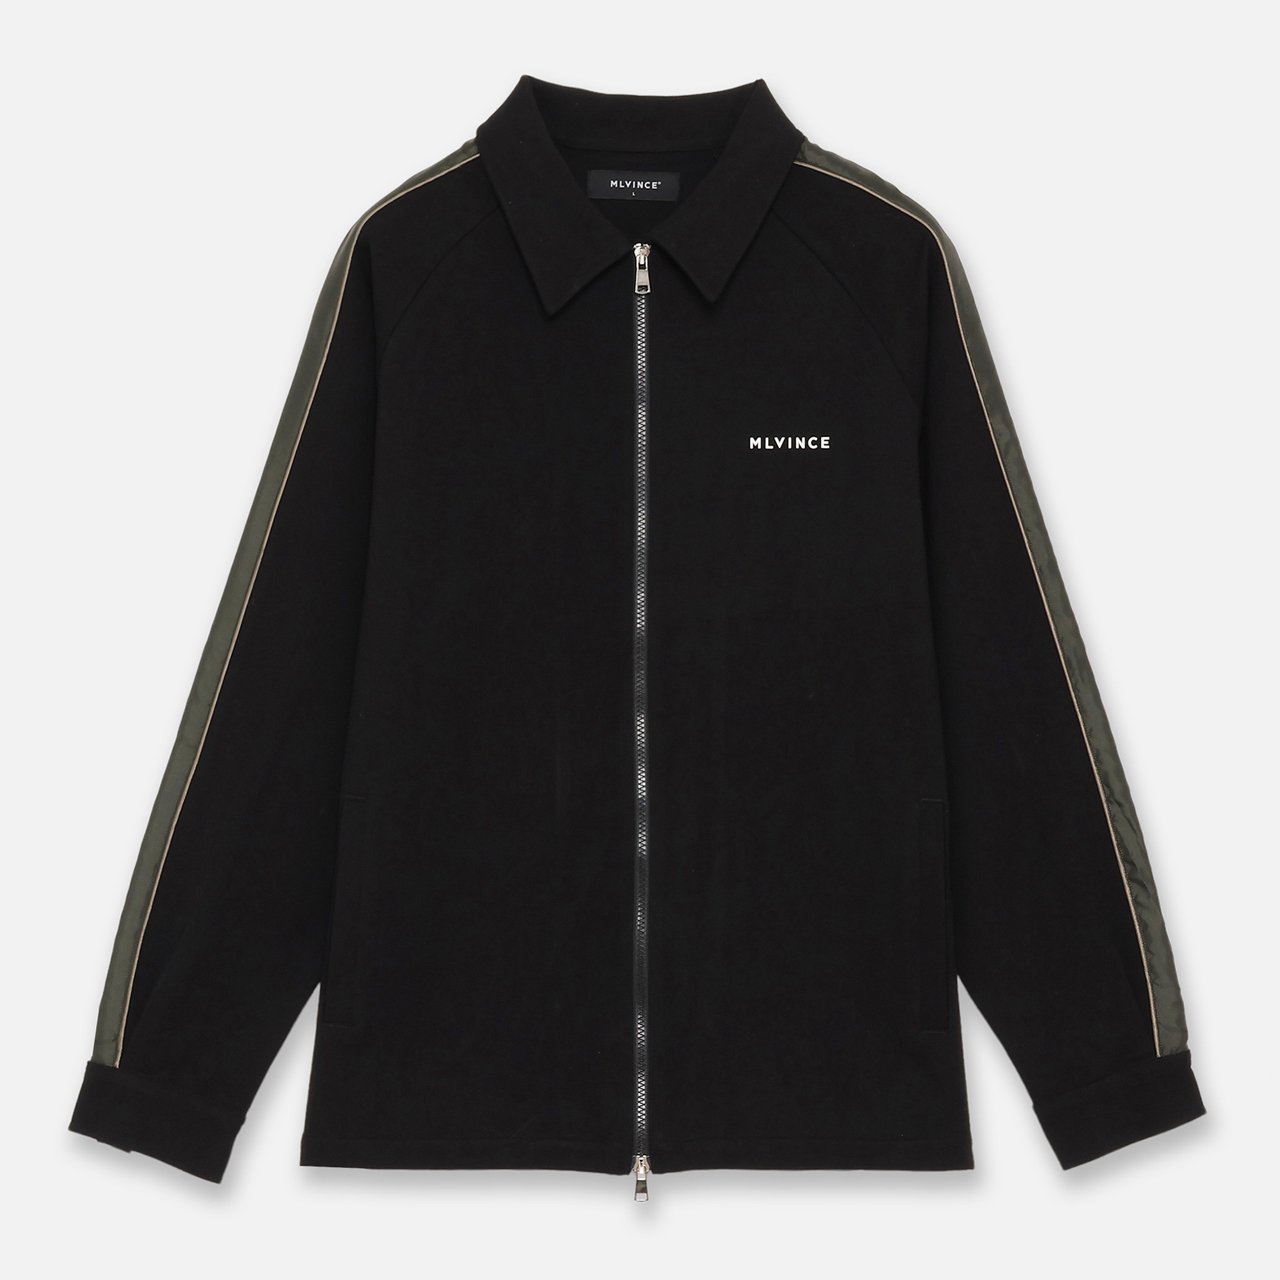 <img class='new_mark_img1' src='https://img.shop-pro.jp/img/new/icons5.gif' style='border:none;display:inline;margin:0px;padding:0px;width:auto;' />MLVINCE () | LUX TRACK SUIT BLACK